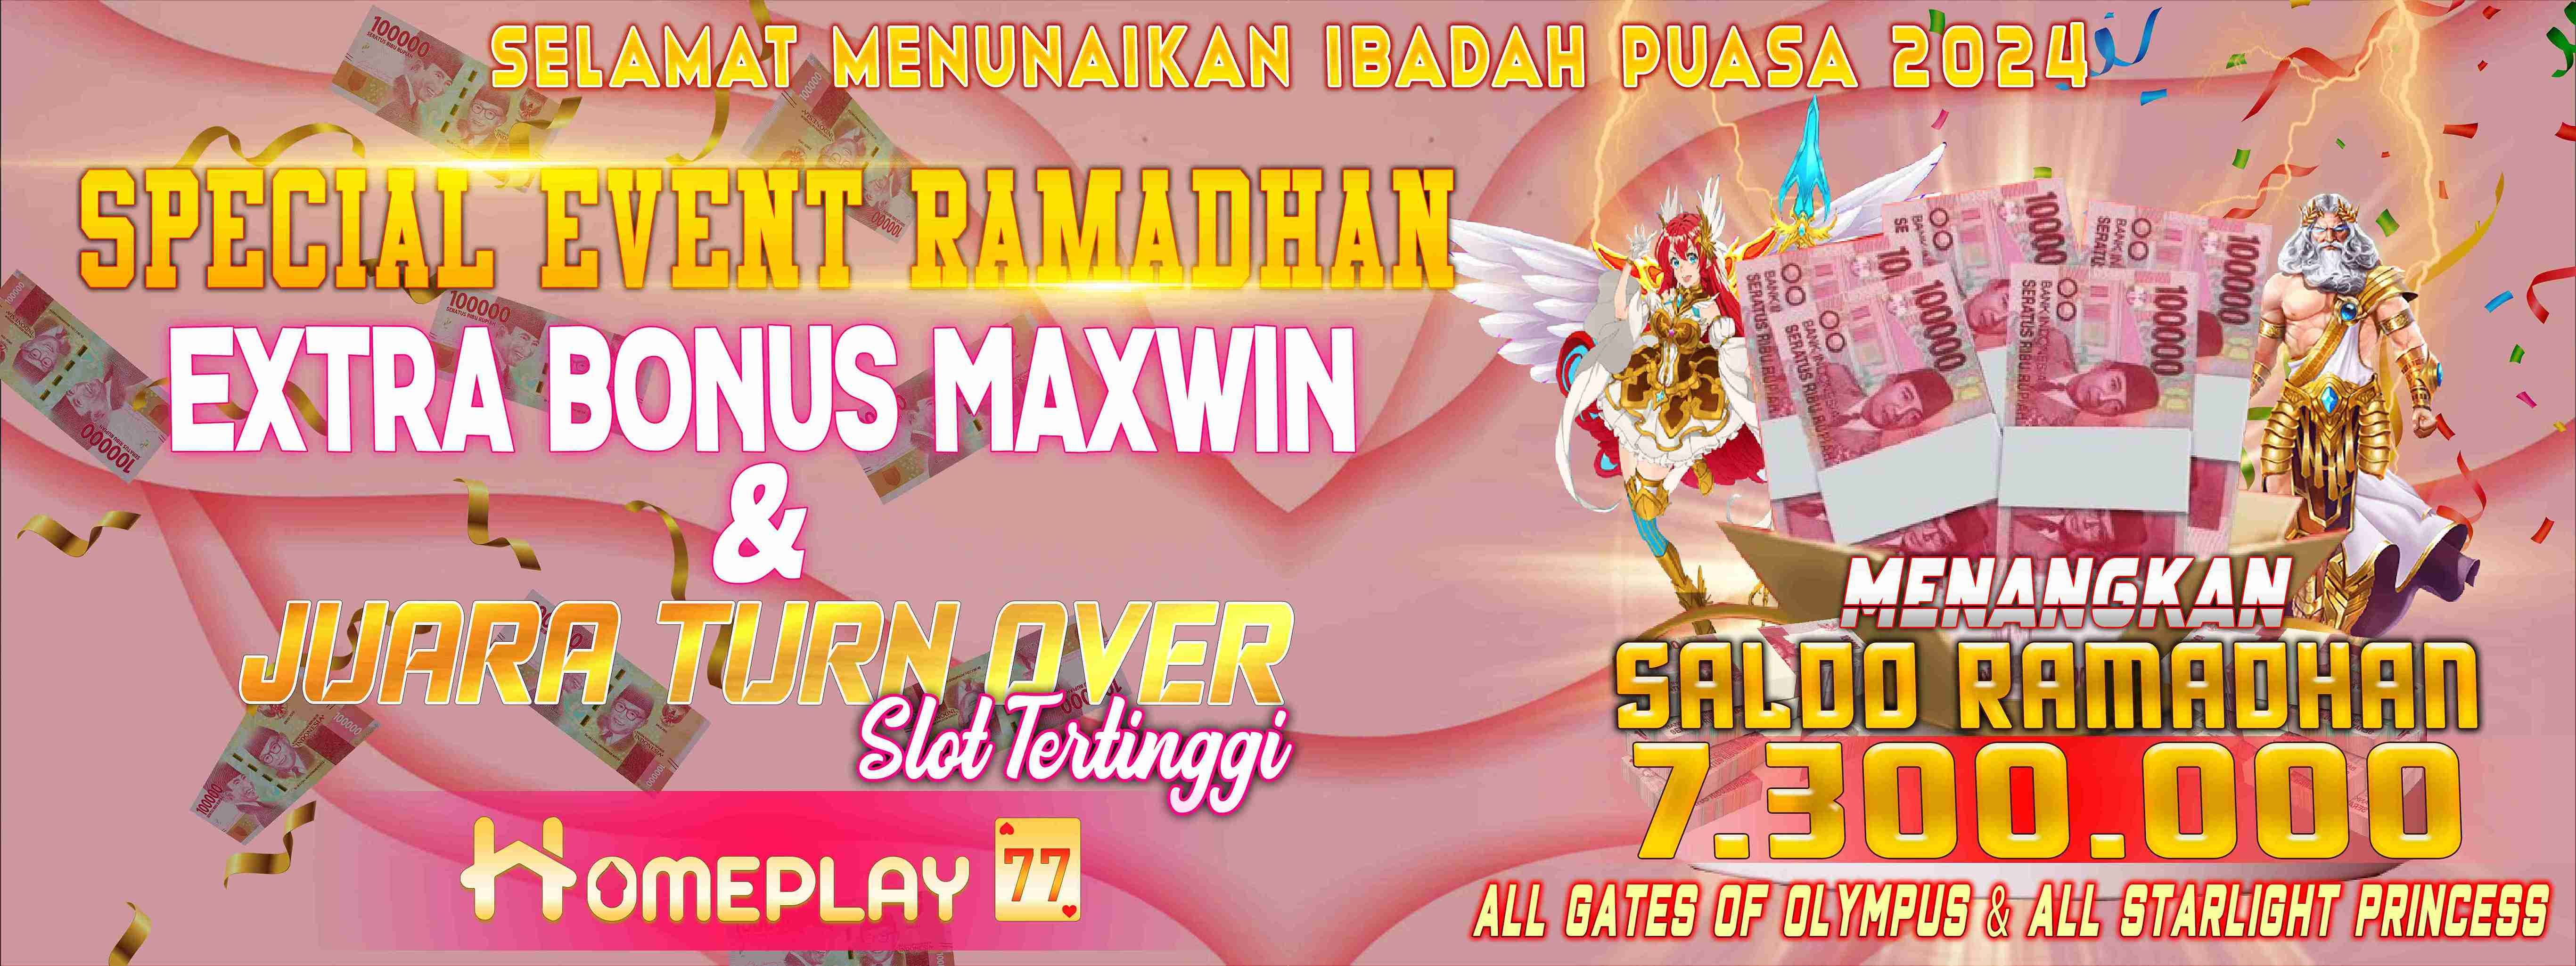 EVENT MAXWIN & TURN OVER HOMEPLAY77